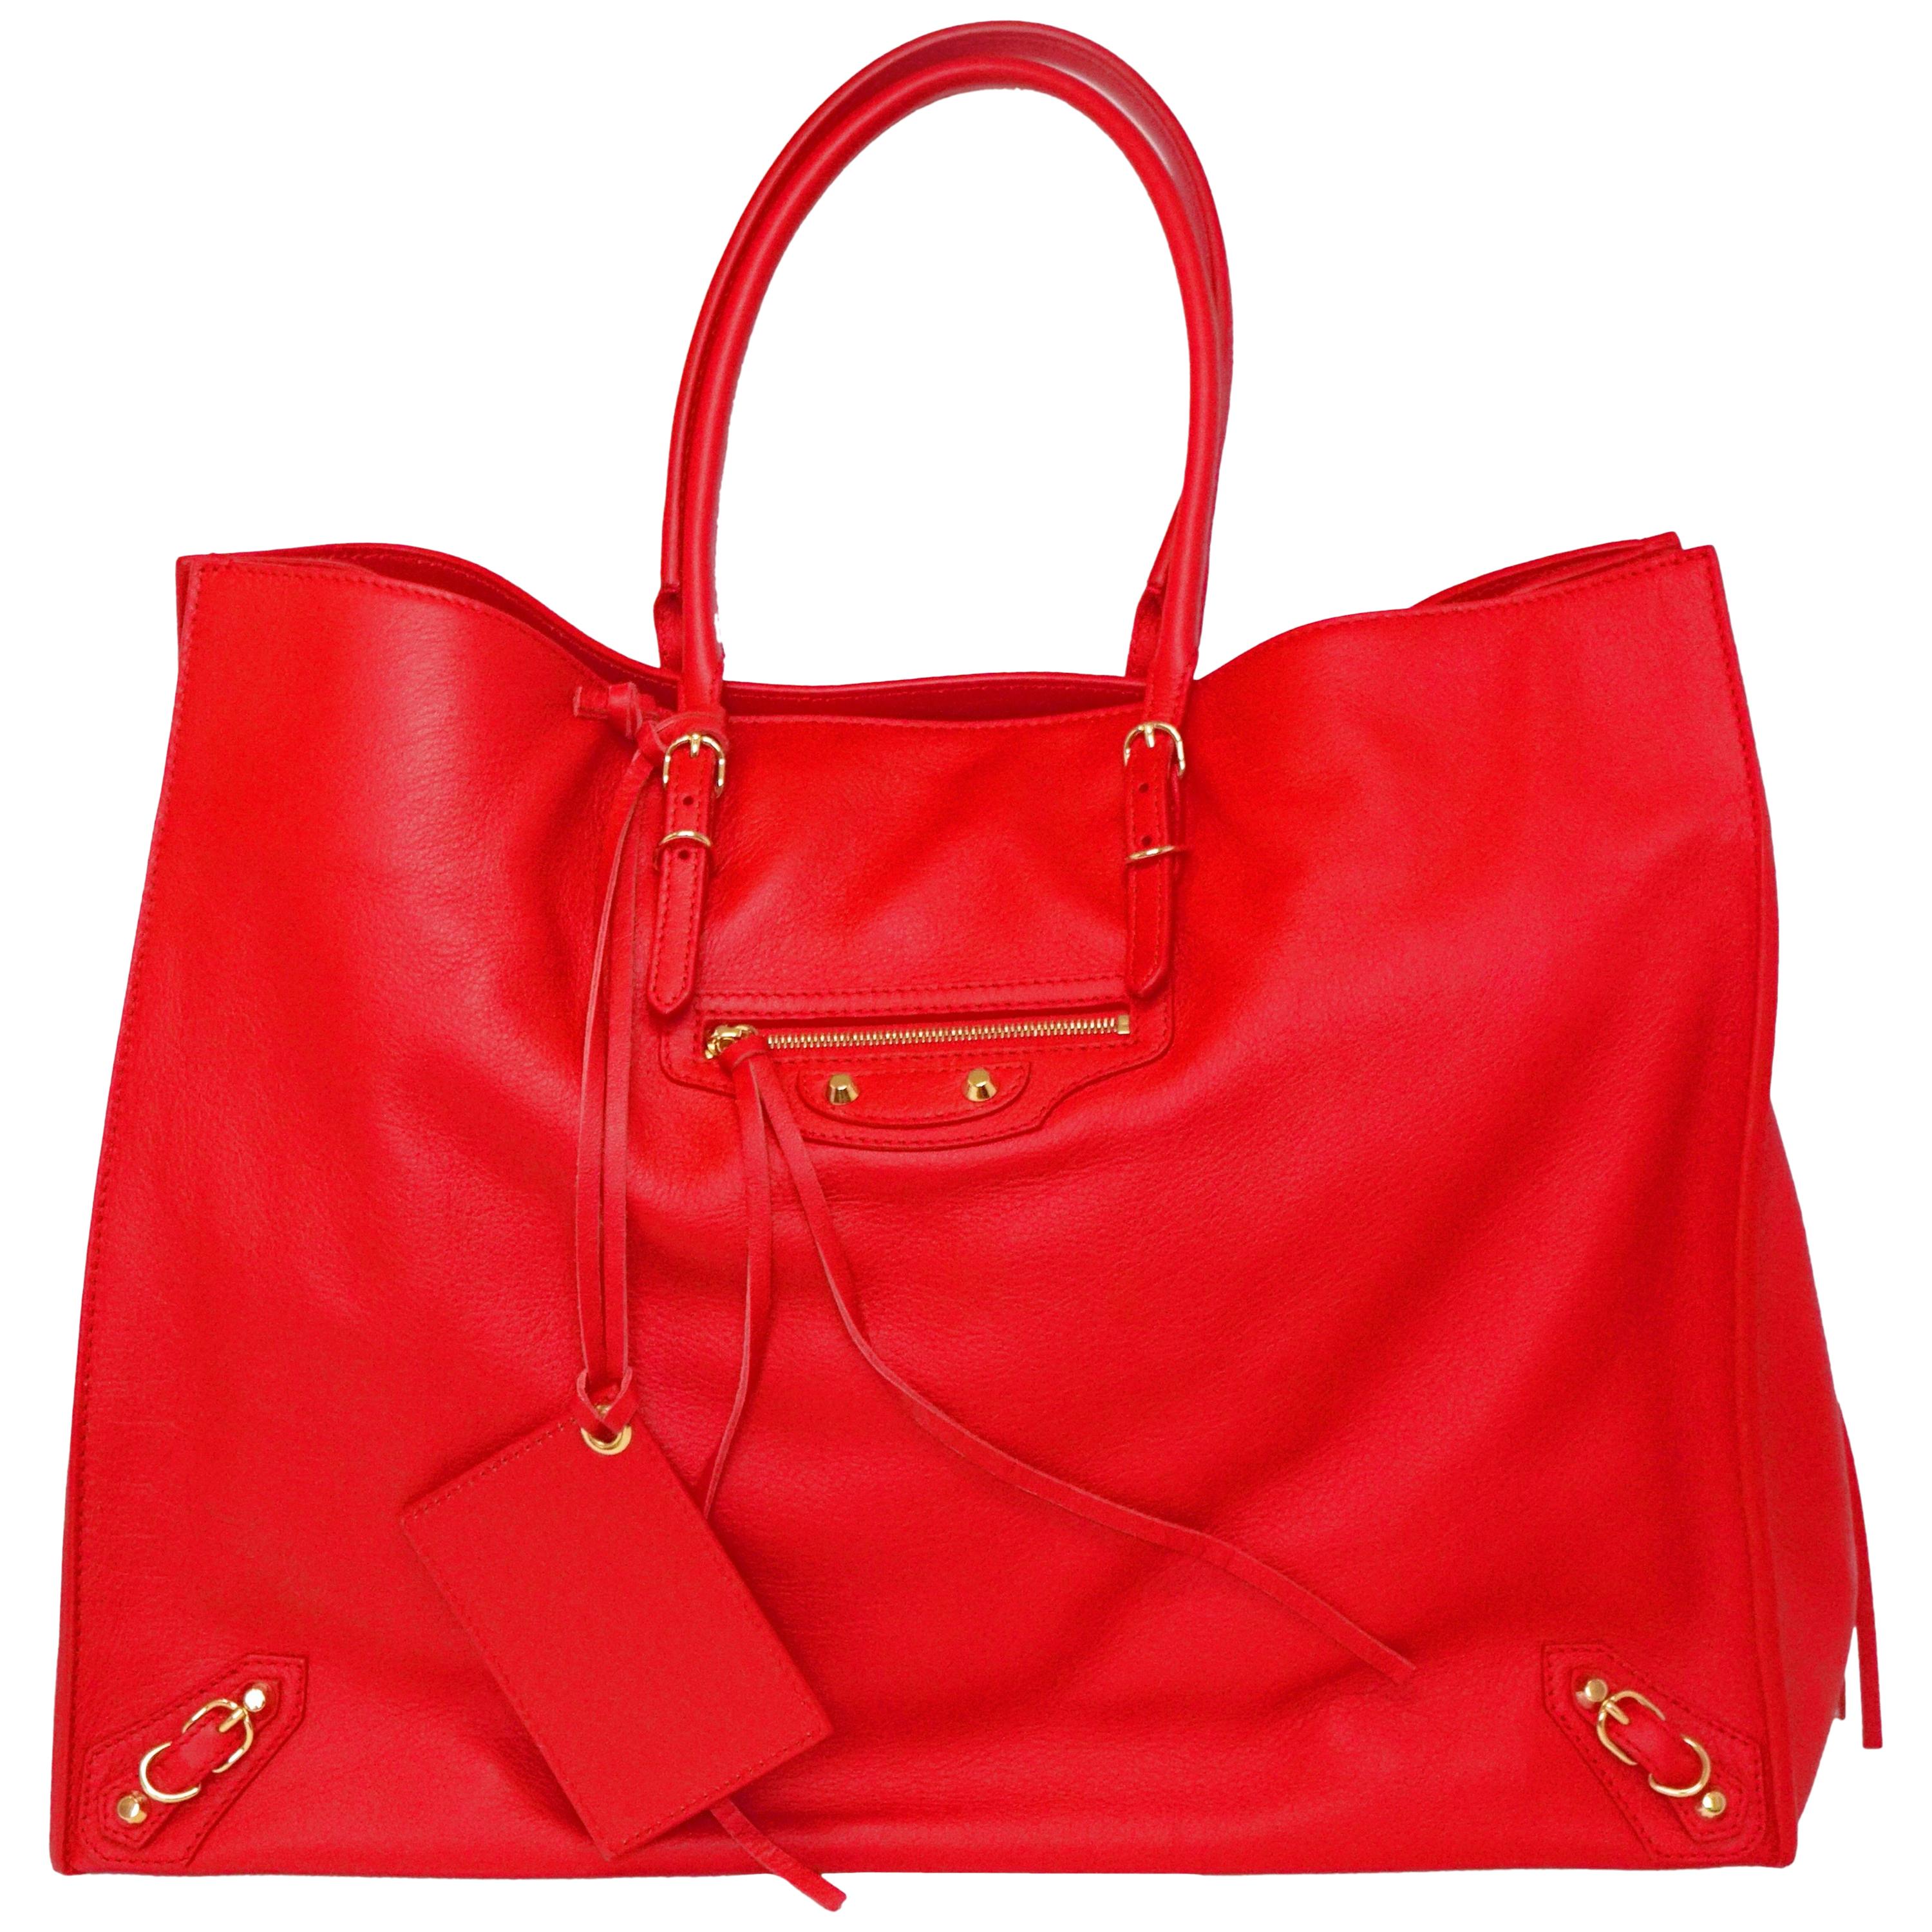 Balenciaga Papier A4 Zip-Around Tote in Red Calfskin Leather, Fall/Winter 2016  